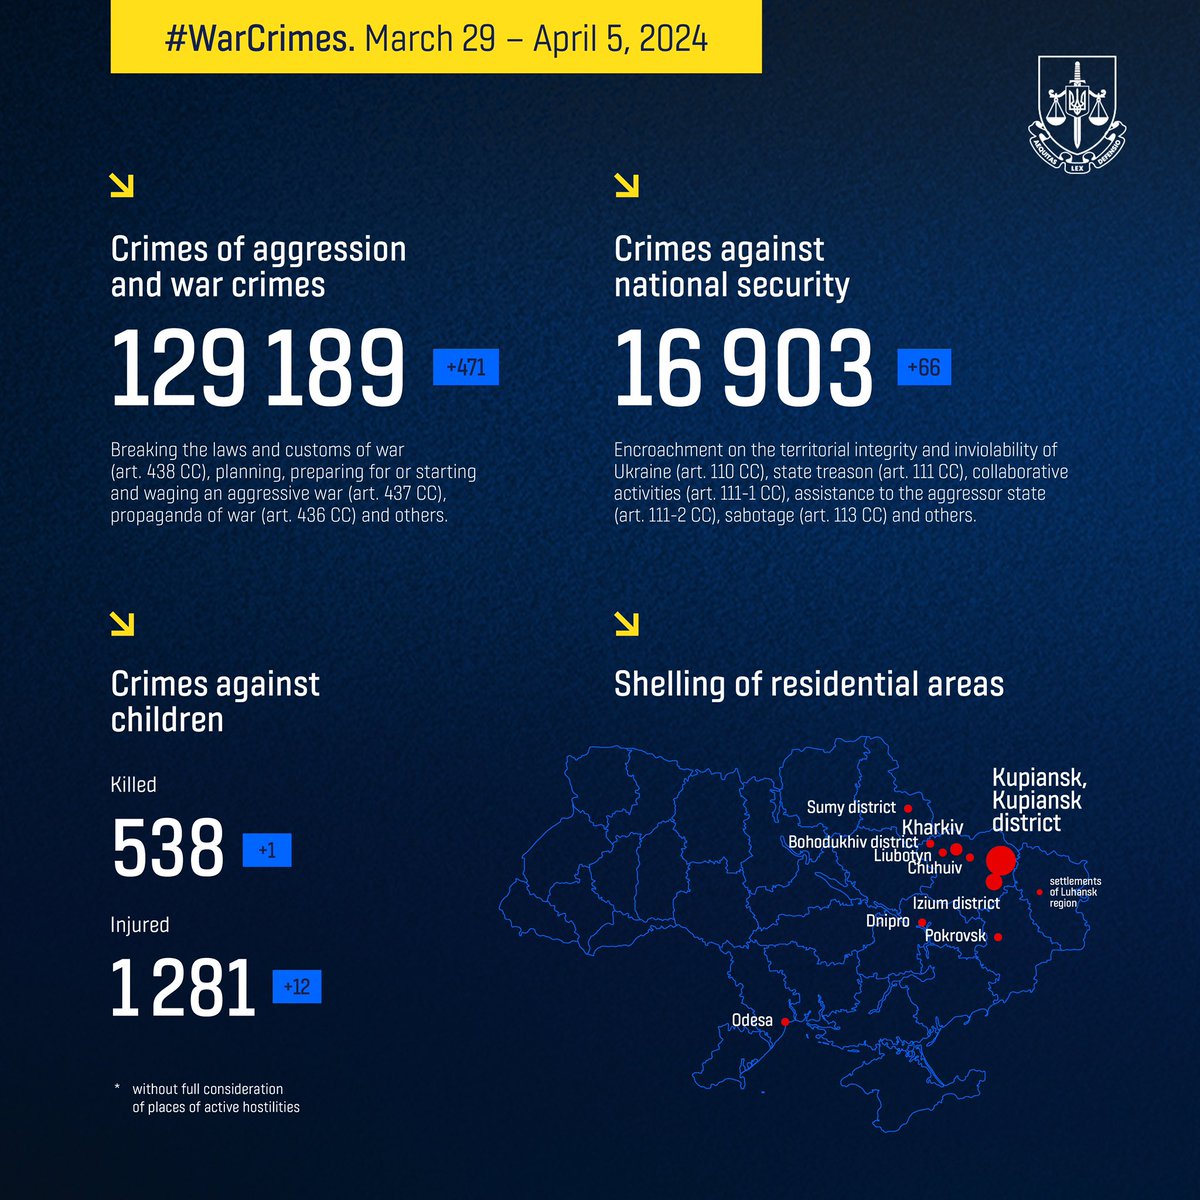 #RussianWarCrimes statistics for the past week: March 29 – April 5, 2024. 537 new crimes registered. At least 538 children killed, 1 281 injured (the data without full consideration of places of active hostilities).